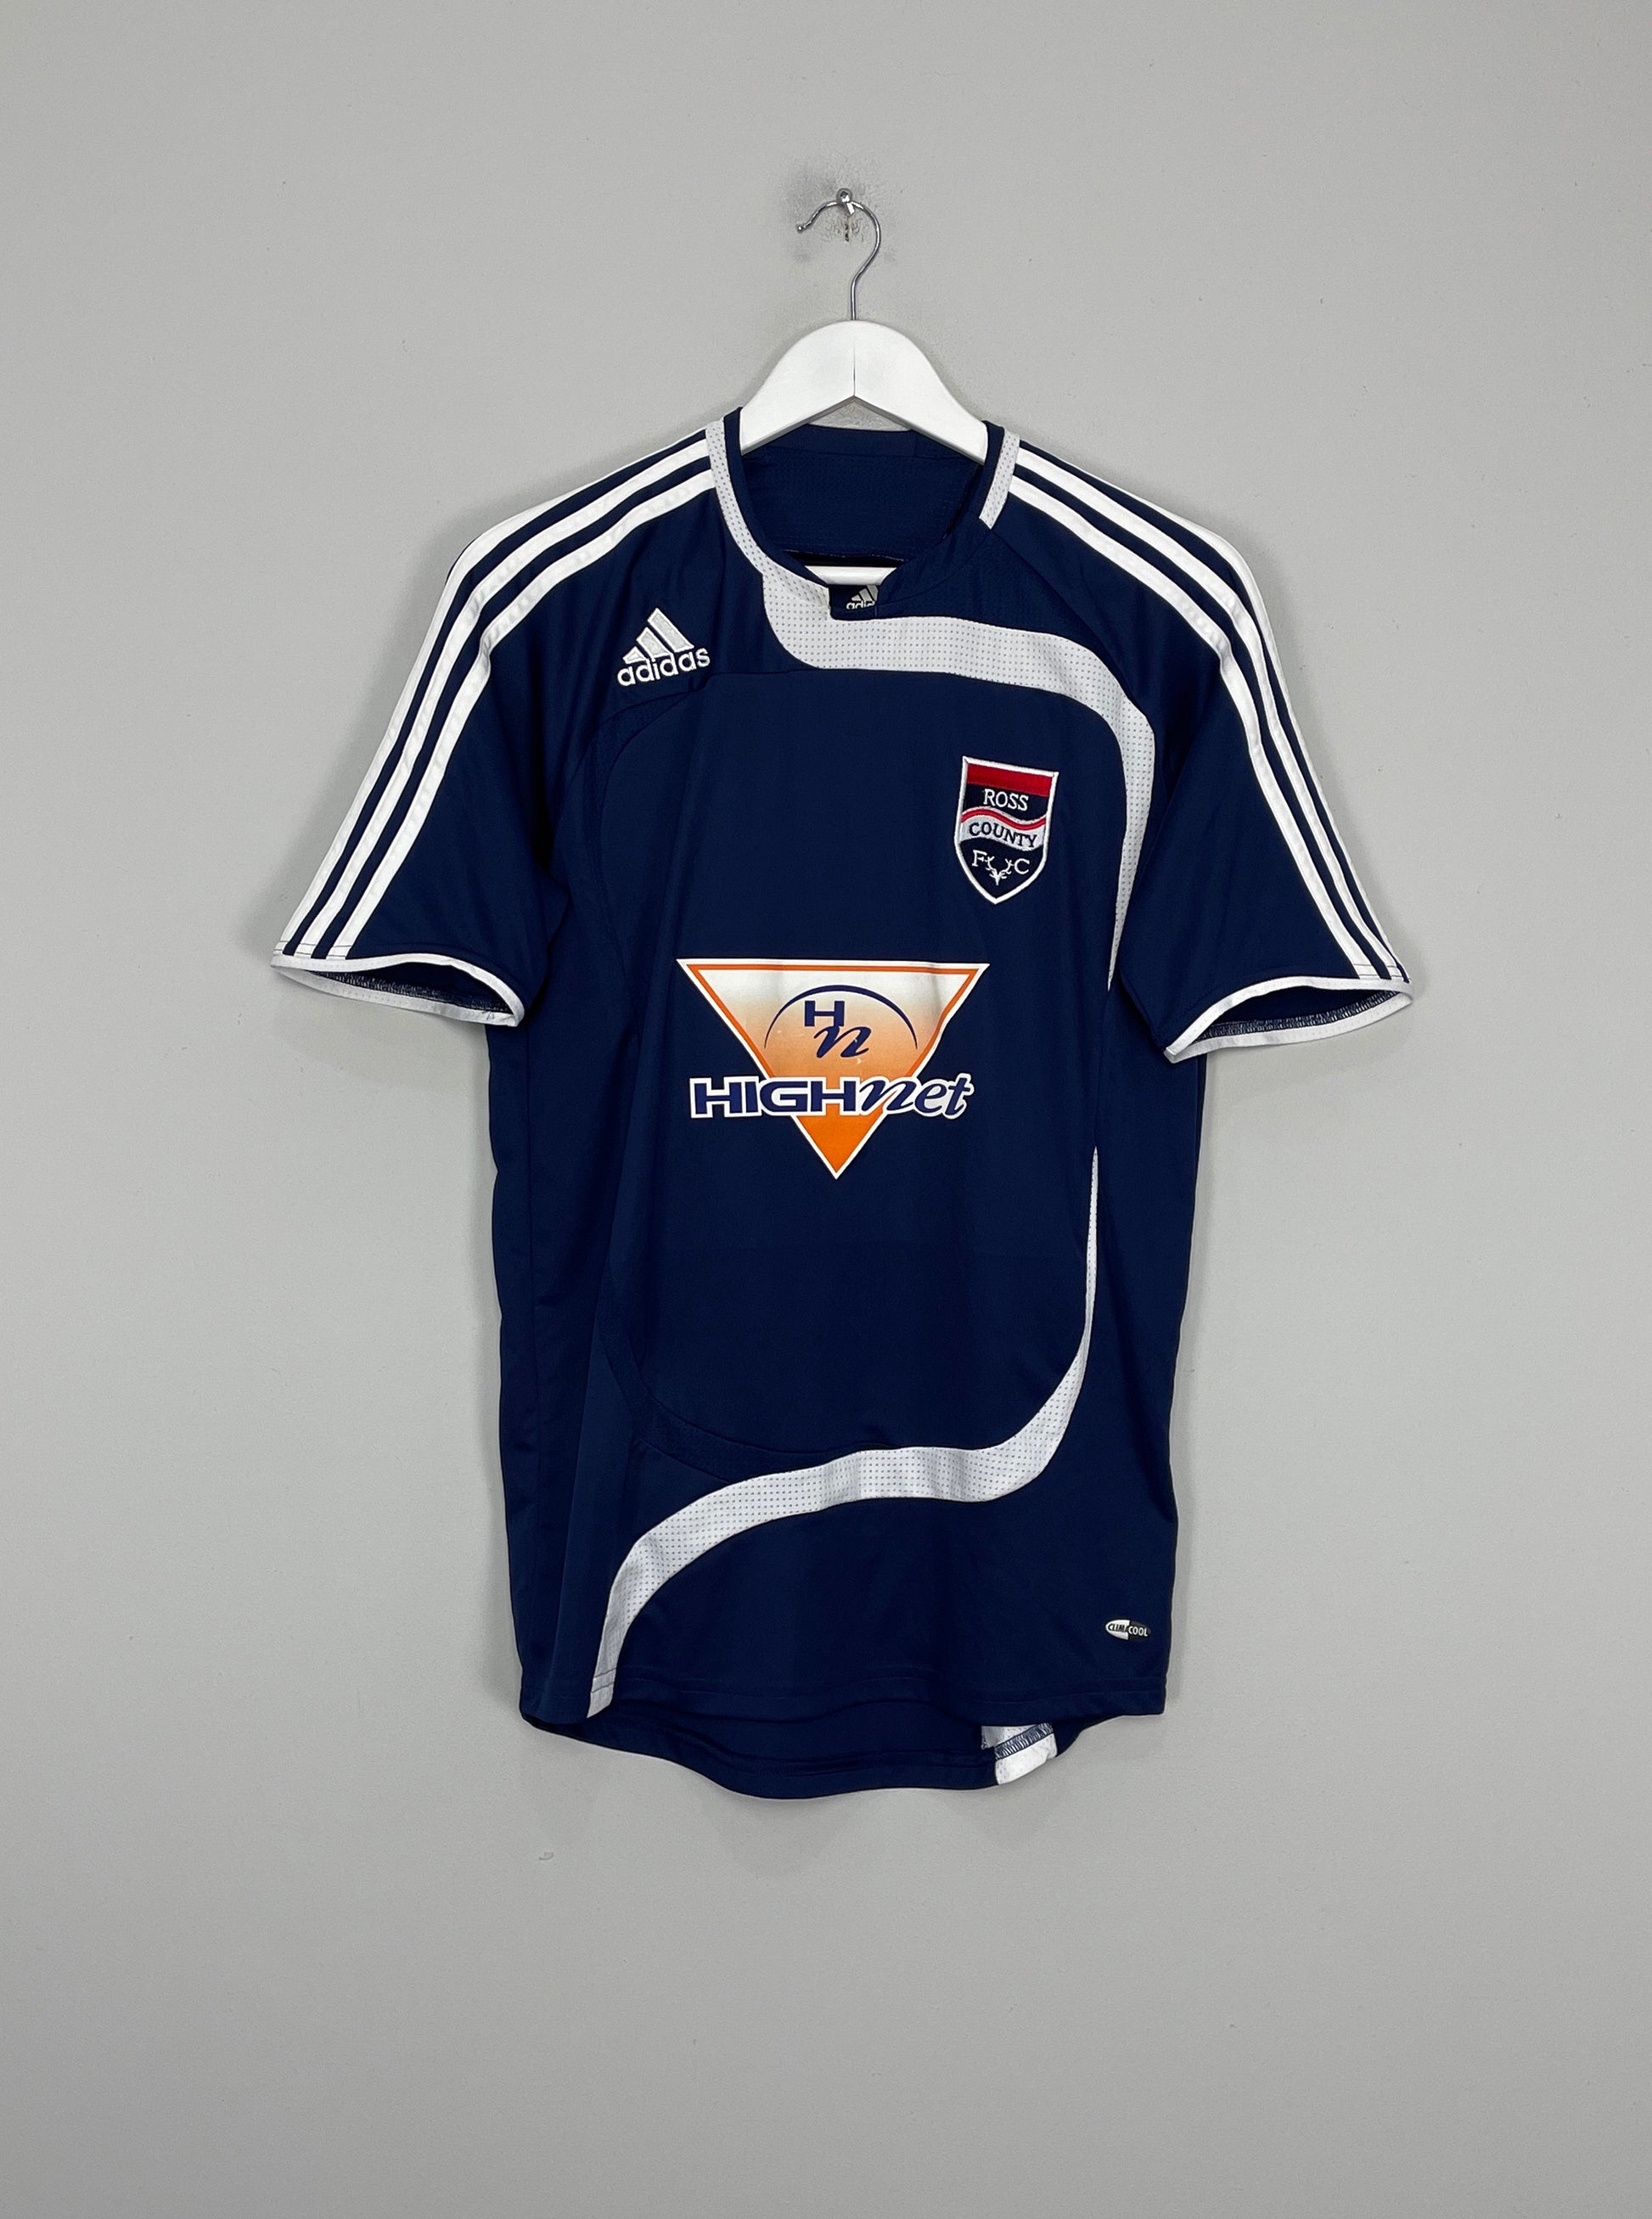 Image of the Ross County shirt from the 2008/09 season